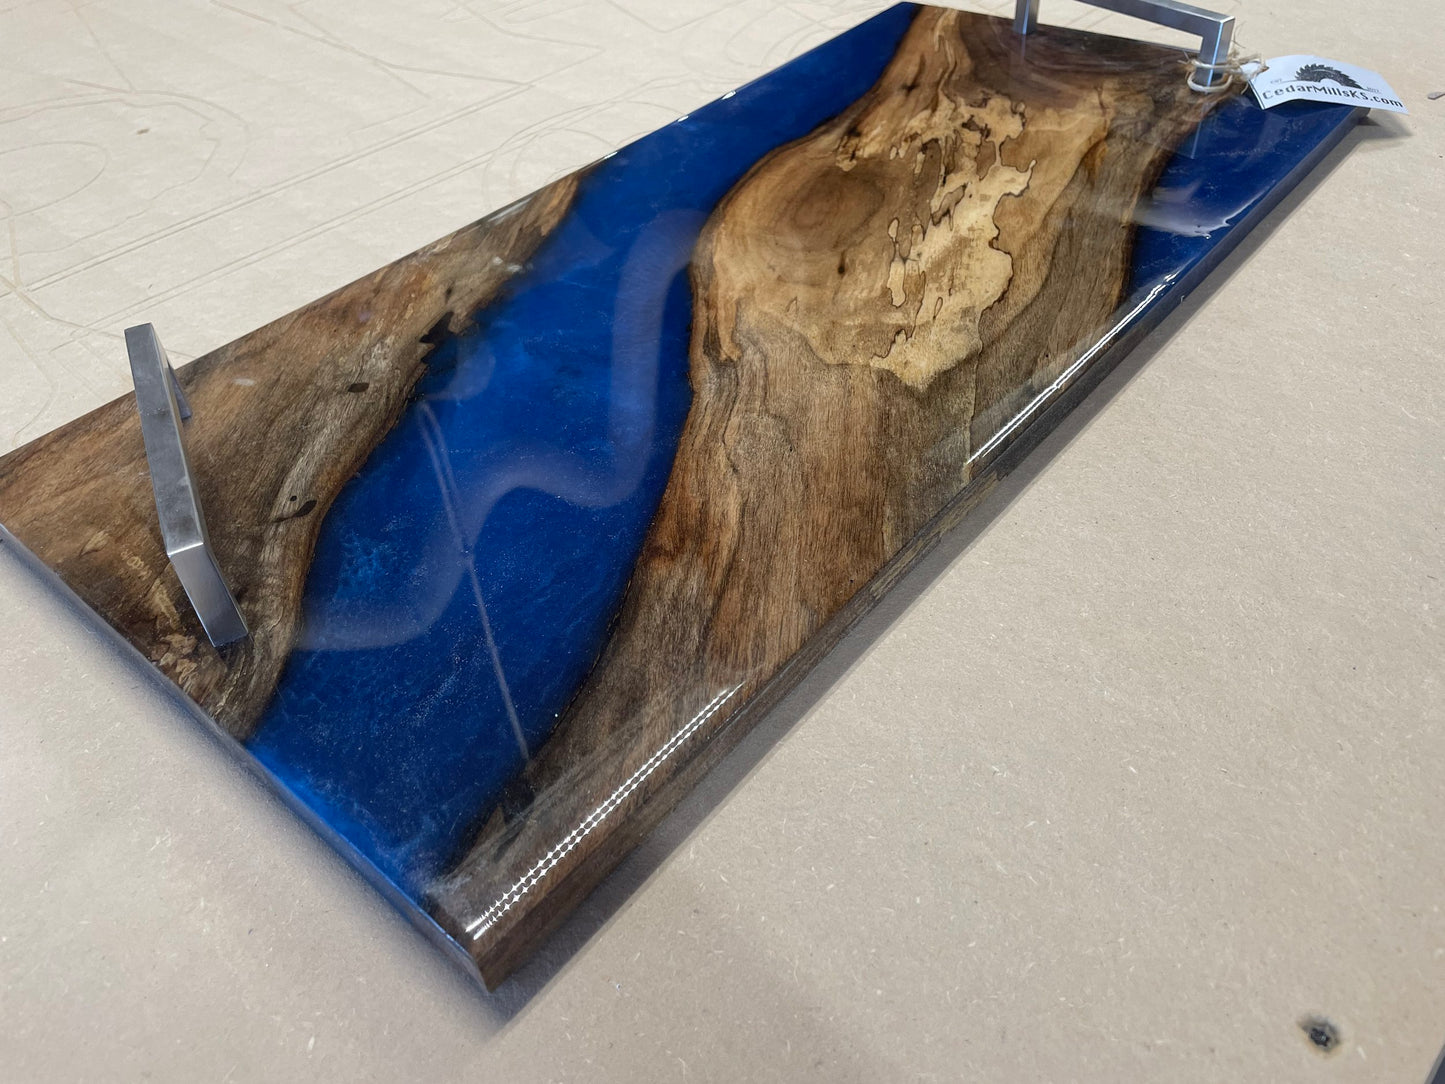 Walnut serving tray completely coated in resin